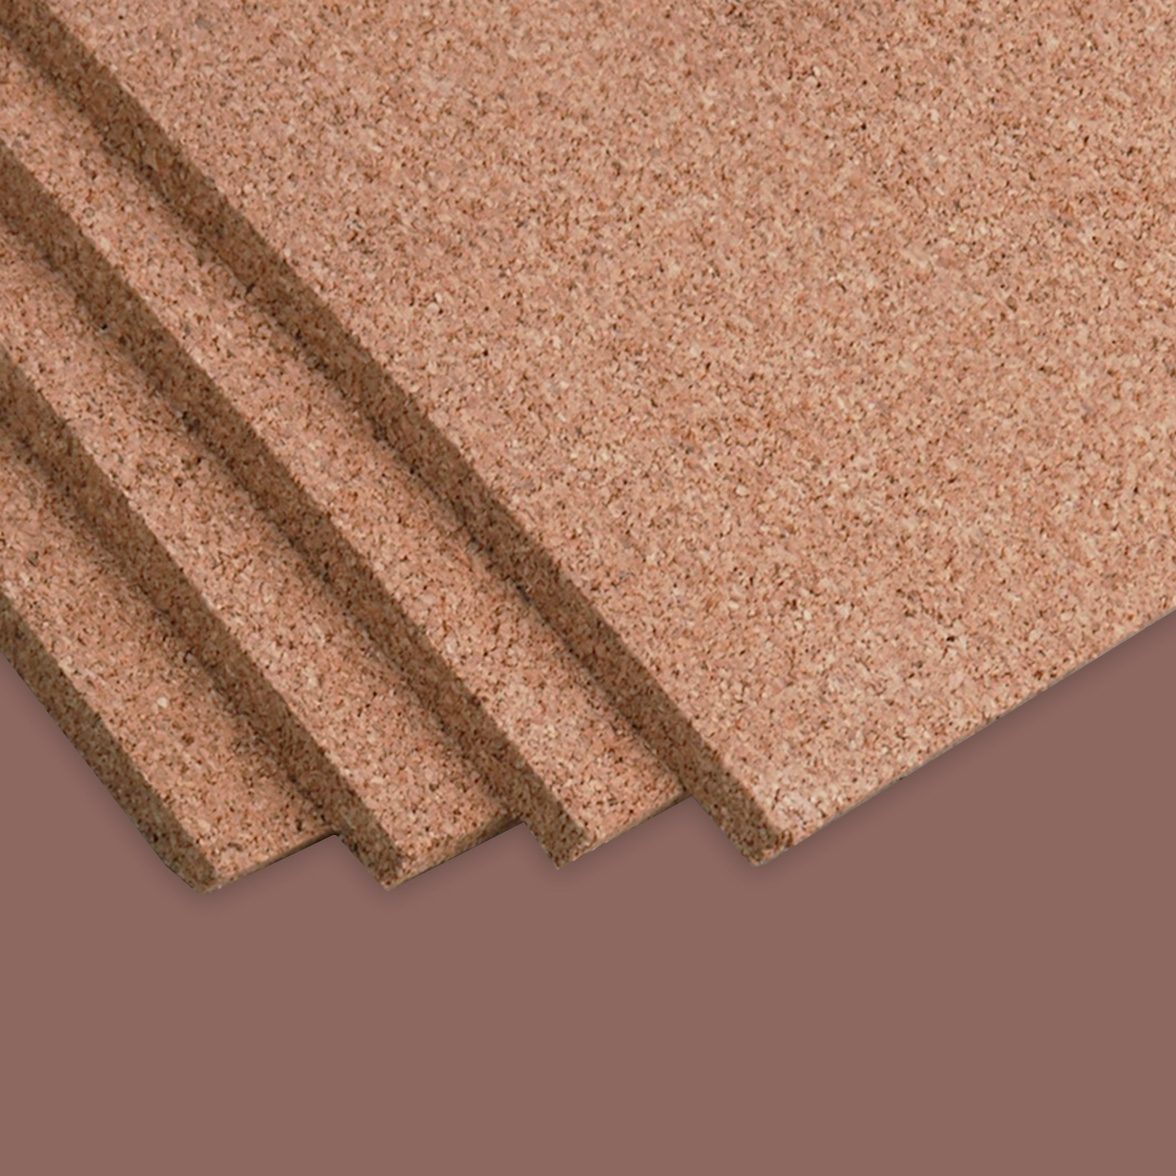 A4 size CORK SHEET NITRILE & SBR bonded Thickness 3mm x 1 